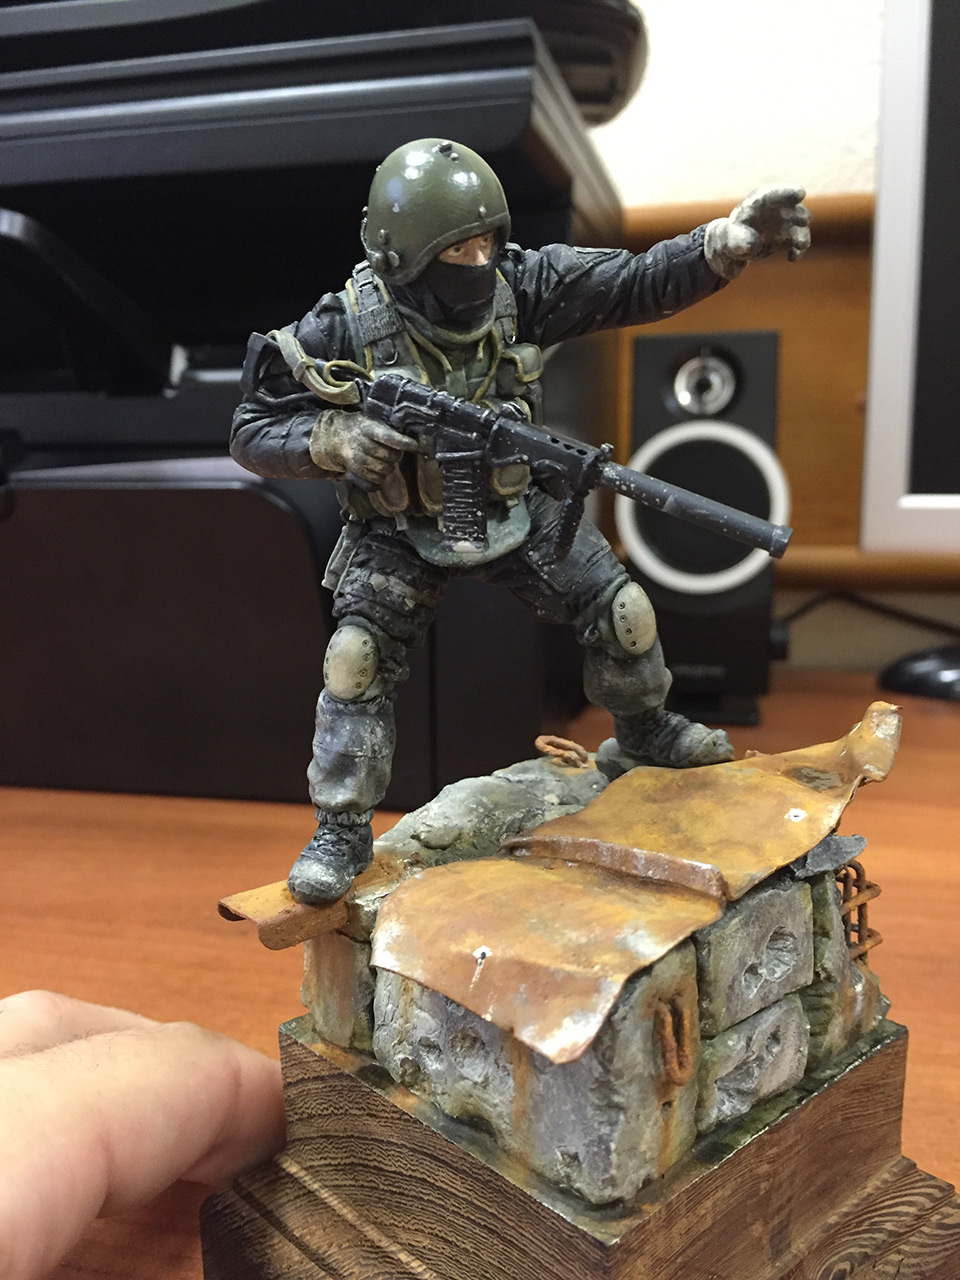 Sculpture: Russian special forces trooper, photo #13